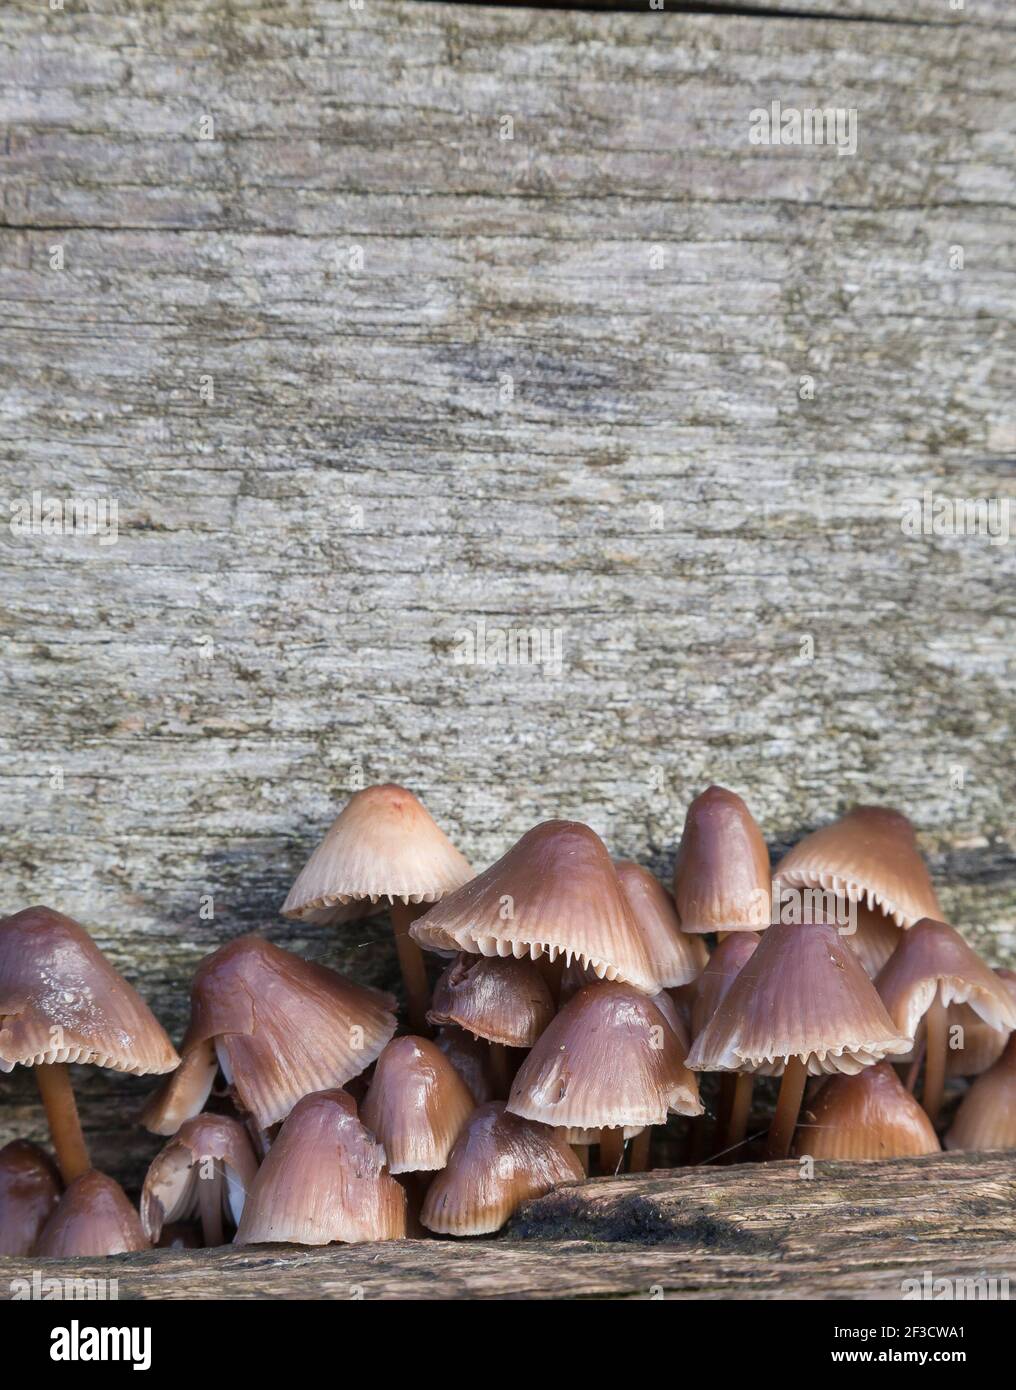 Mushrooms (clustered bonnet). Rustic, organic toadstools or fungi growing wild in woods in autumn, UK Stock Photo